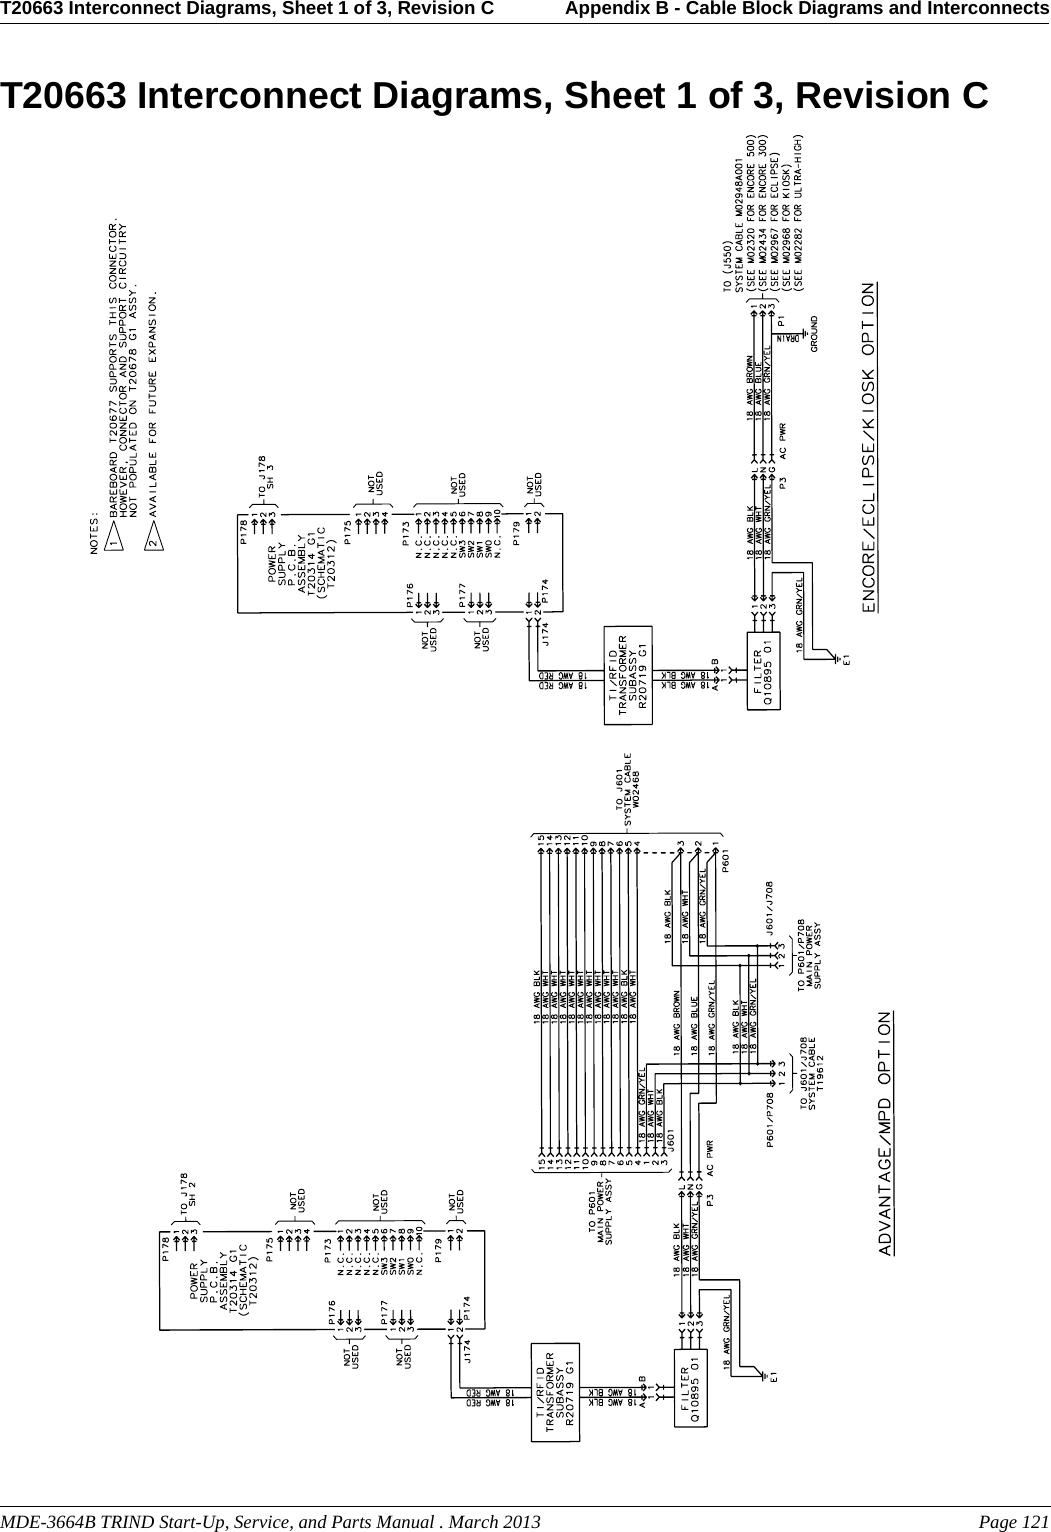 MDE-3664B TRIND Start-Up, Service, and Parts Manual . March 2013 Page 121T20663 Interconnect Diagrams, Sheet 1 of 3, Revision C Appendix B - Cable Block Diagrams and InterconnectsPreliminaryT20663 Interconnect Diagrams, Sheet 1 of 3, Revision C